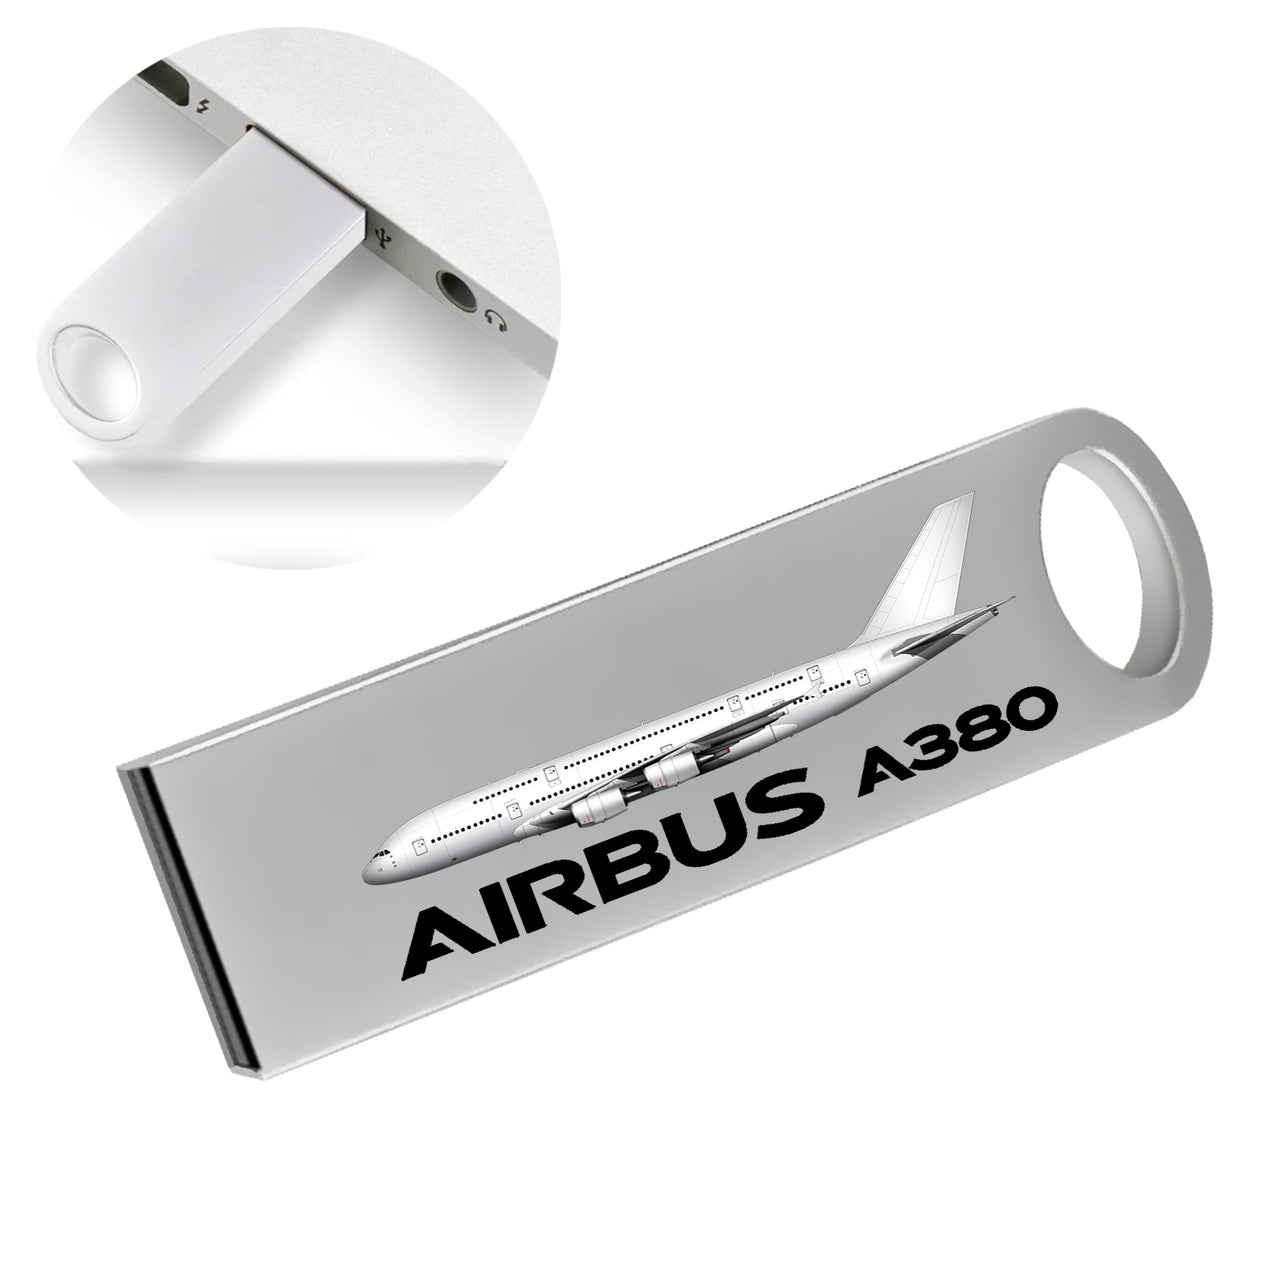 The Airbus A380 Designed Waterproof USB Devices